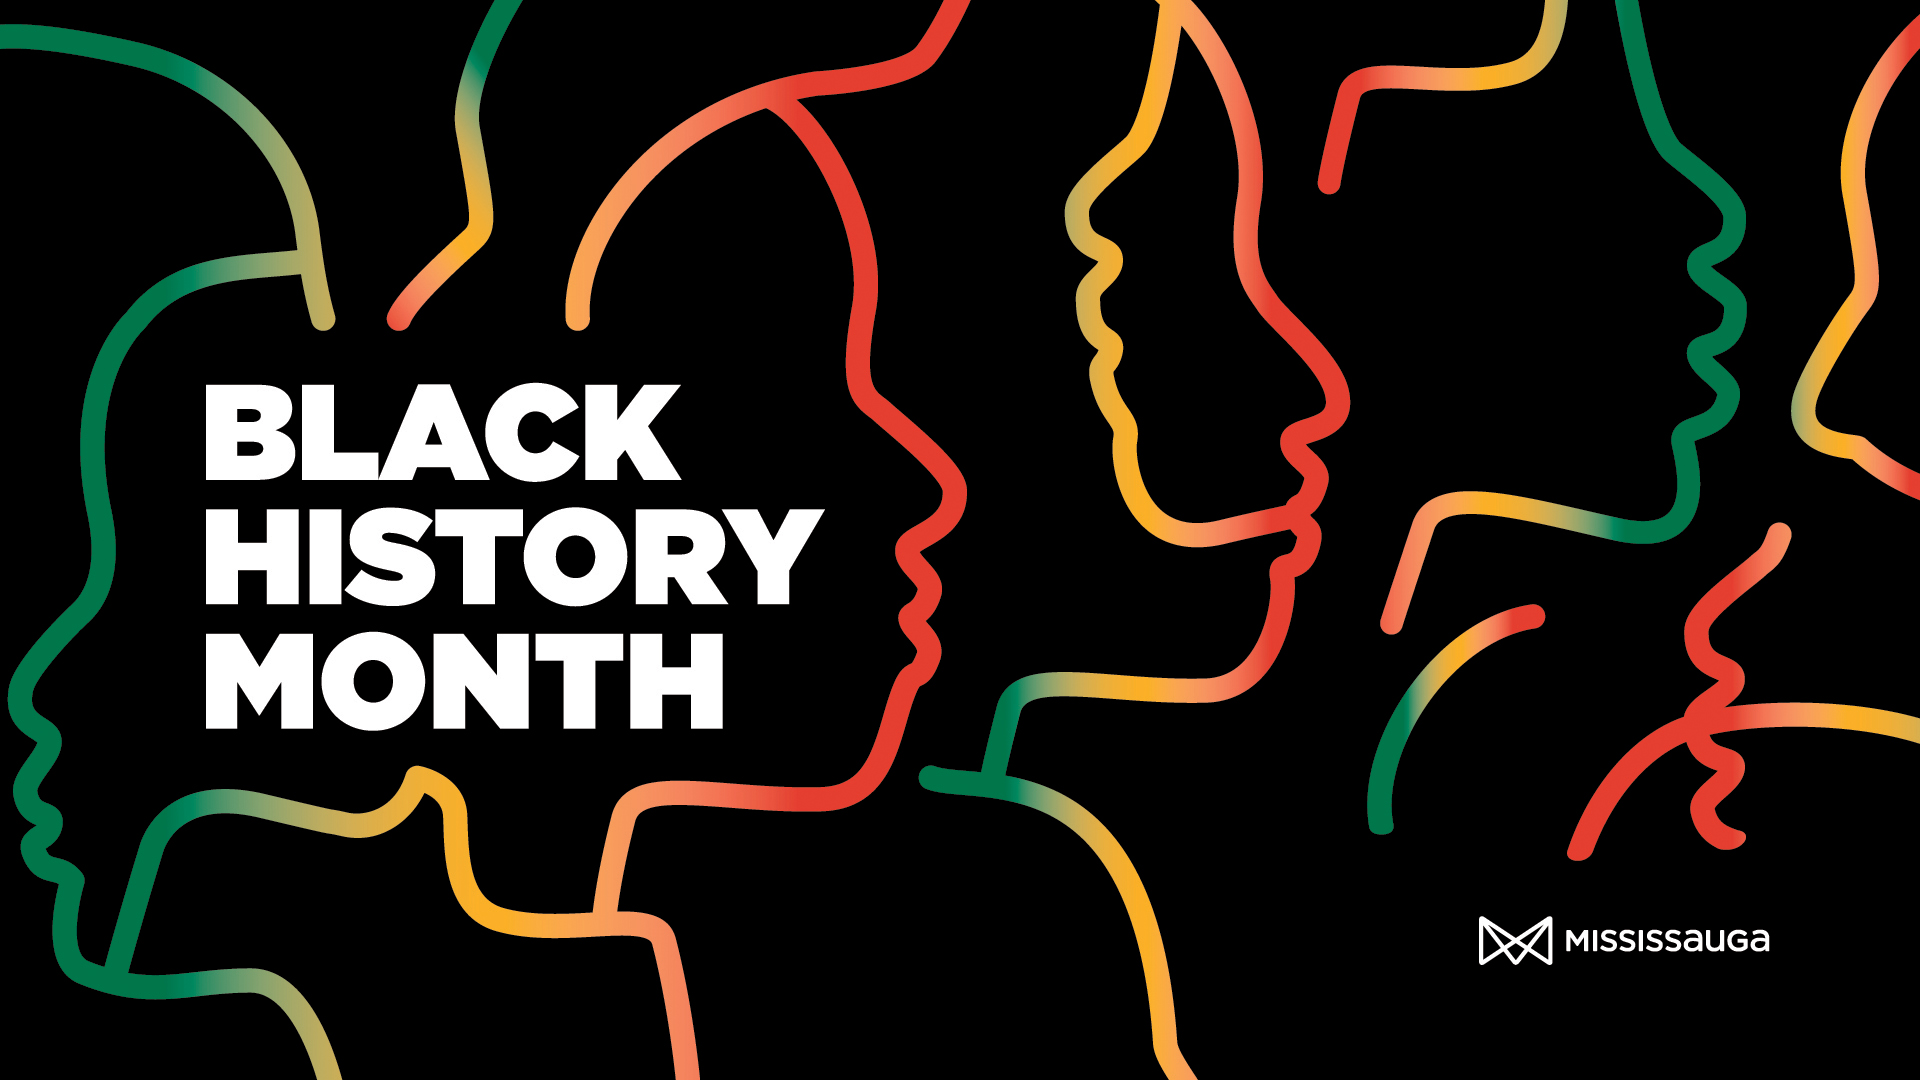 Mississauga recognizes Black History Month – City of Mississauga